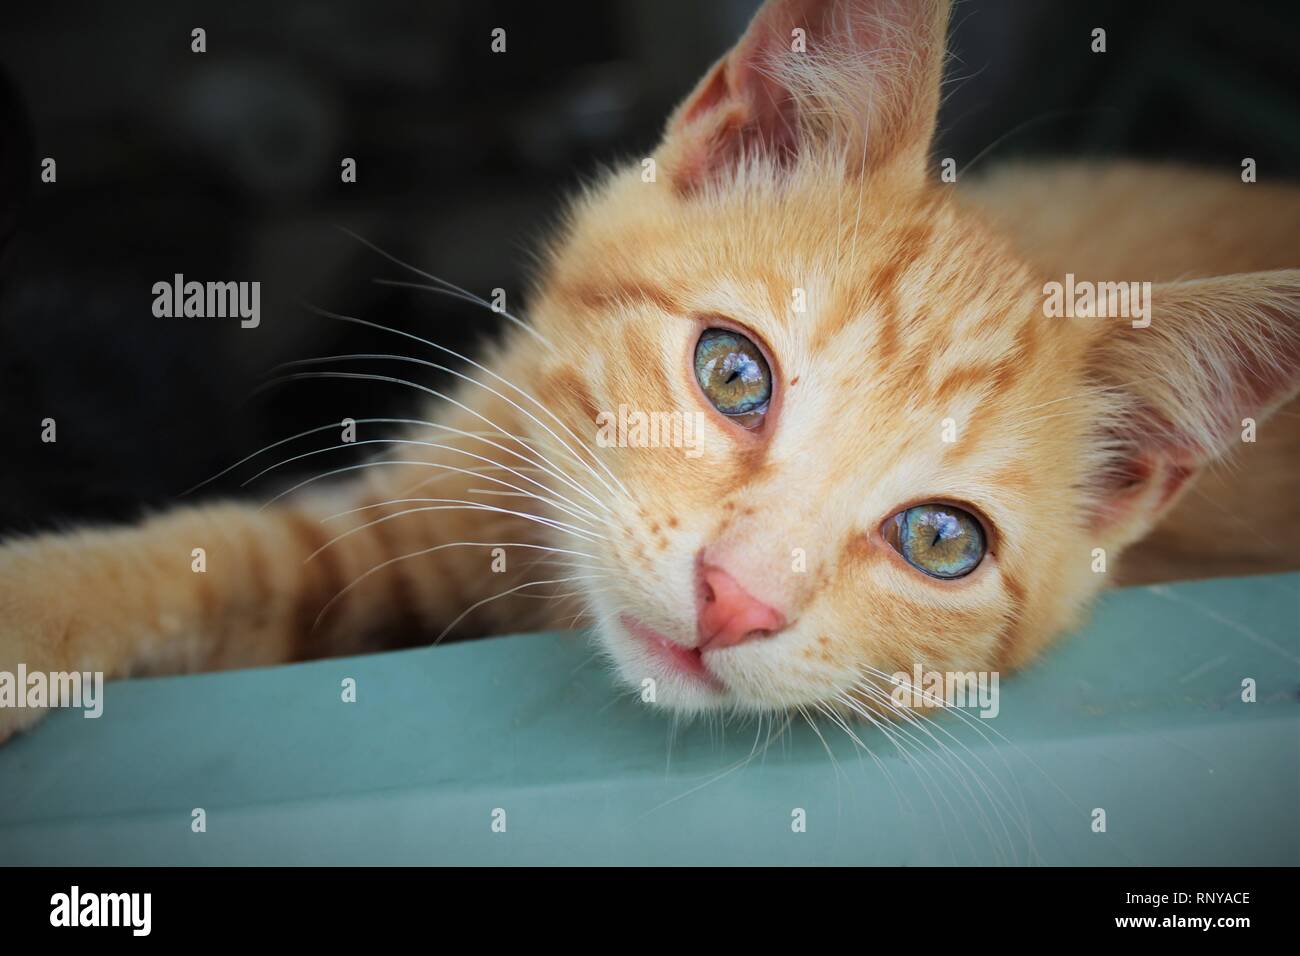 Orange Male Cat With Blue Eyes On A Blue Piece Of Metal Stock Photo Alamy